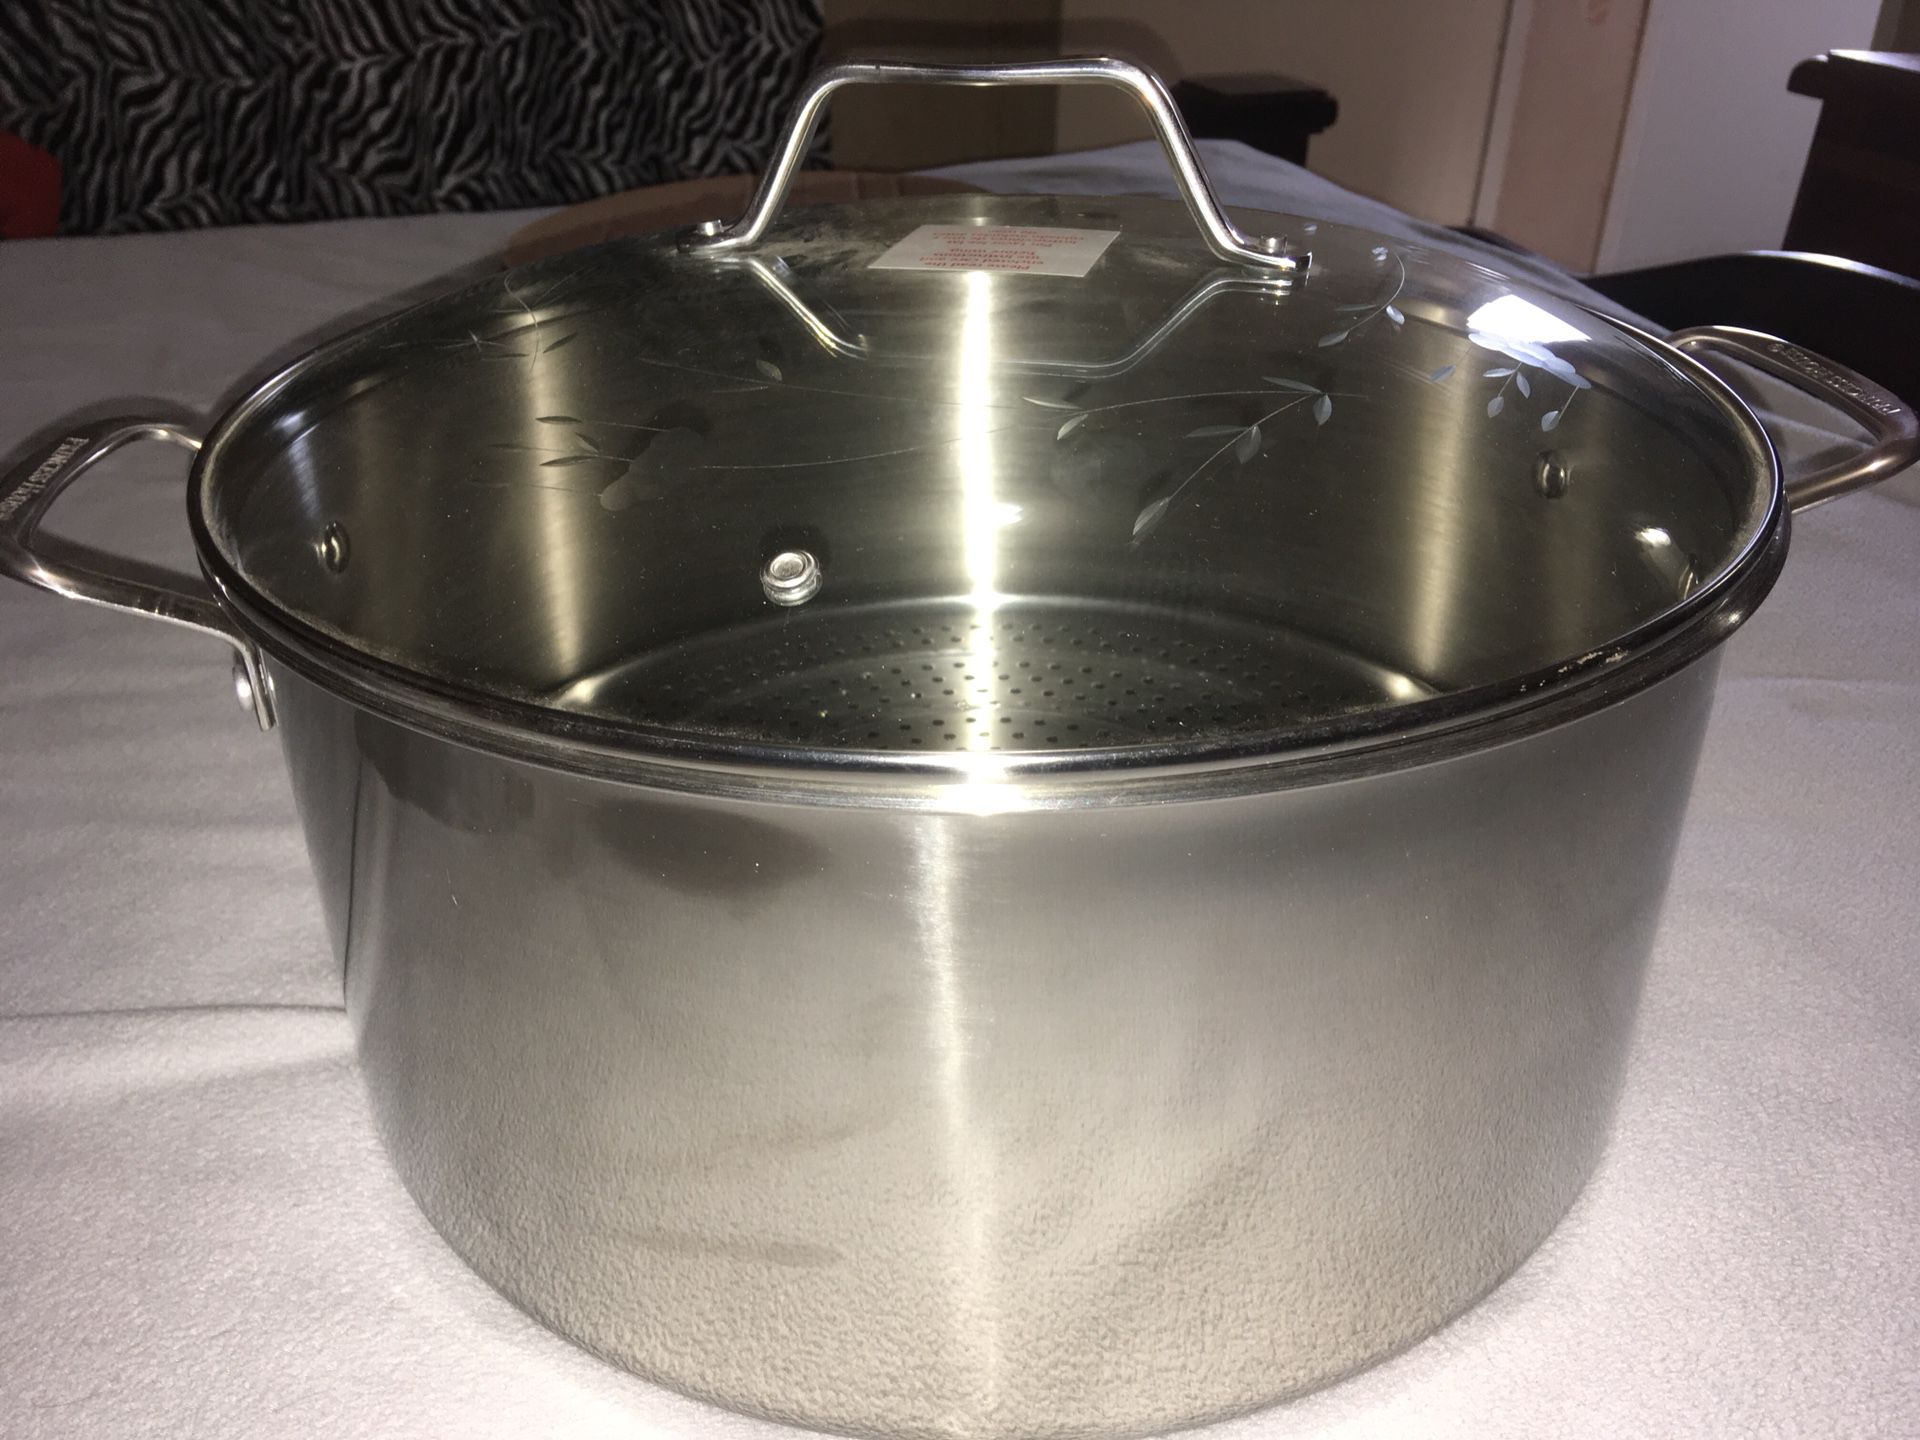 Cuisinart Rice Cooker for Sale in Tulare, CA - OfferUp